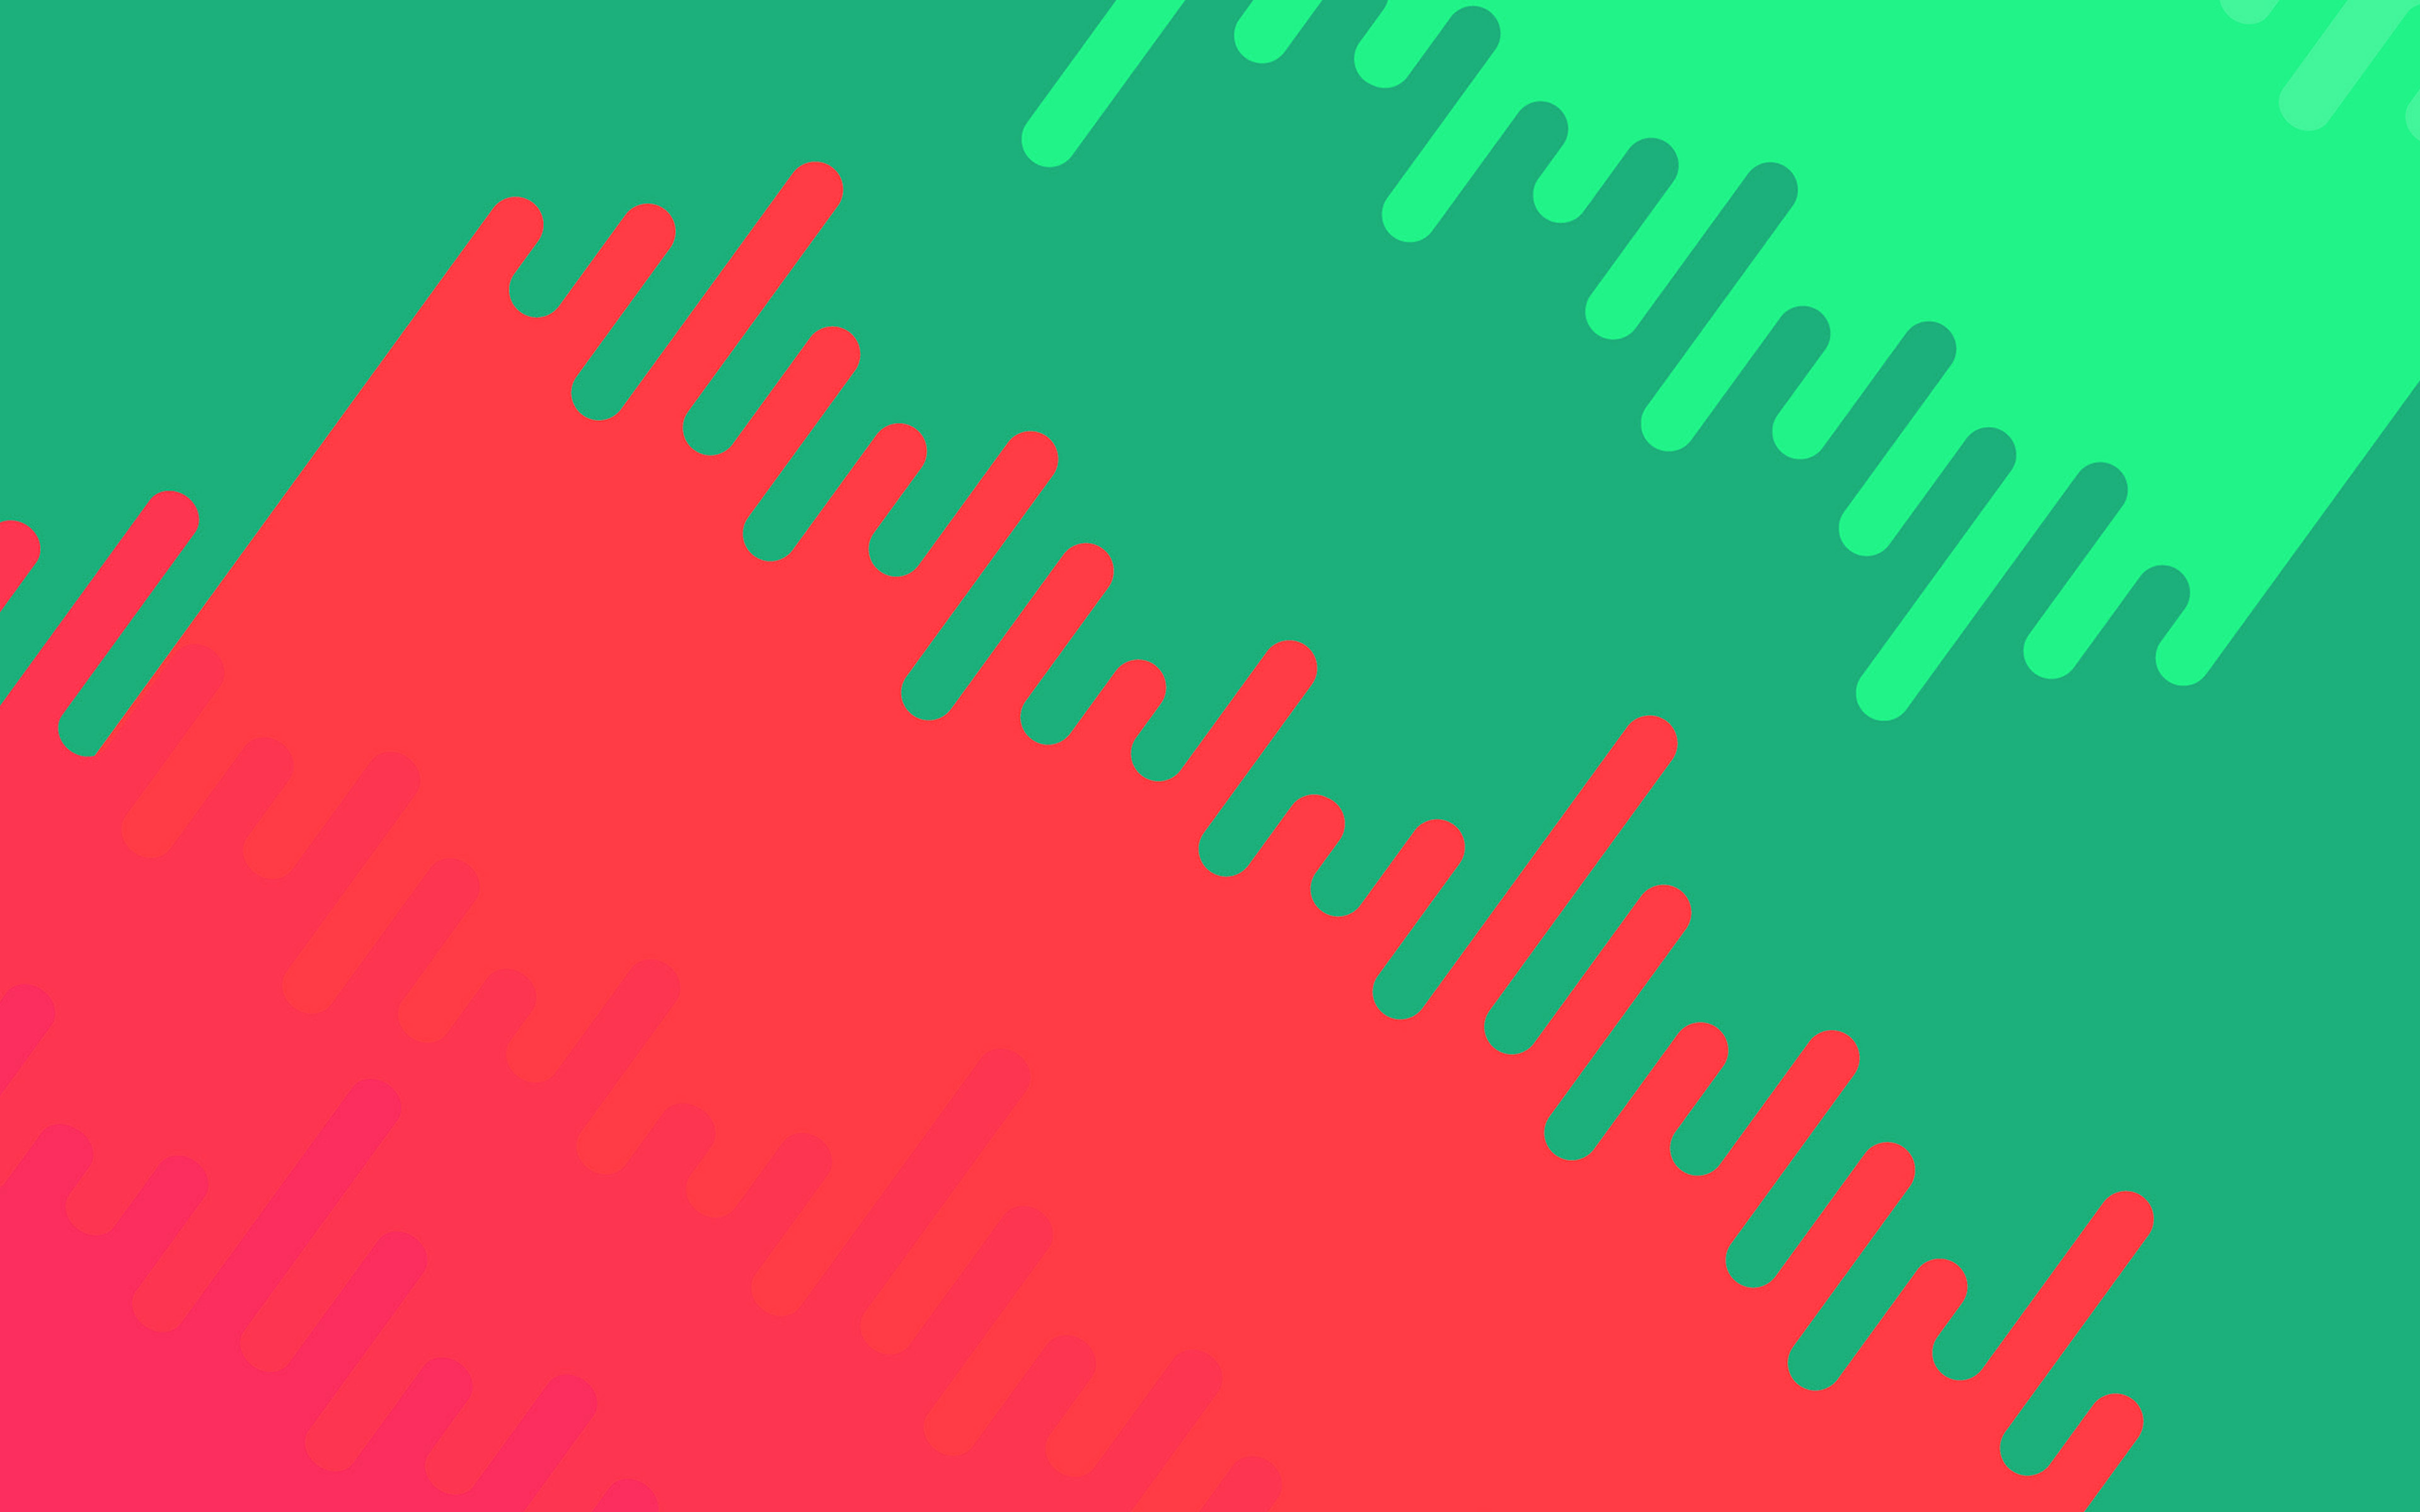 Abstract Red And Green - 3840x2400 Wallpaper 